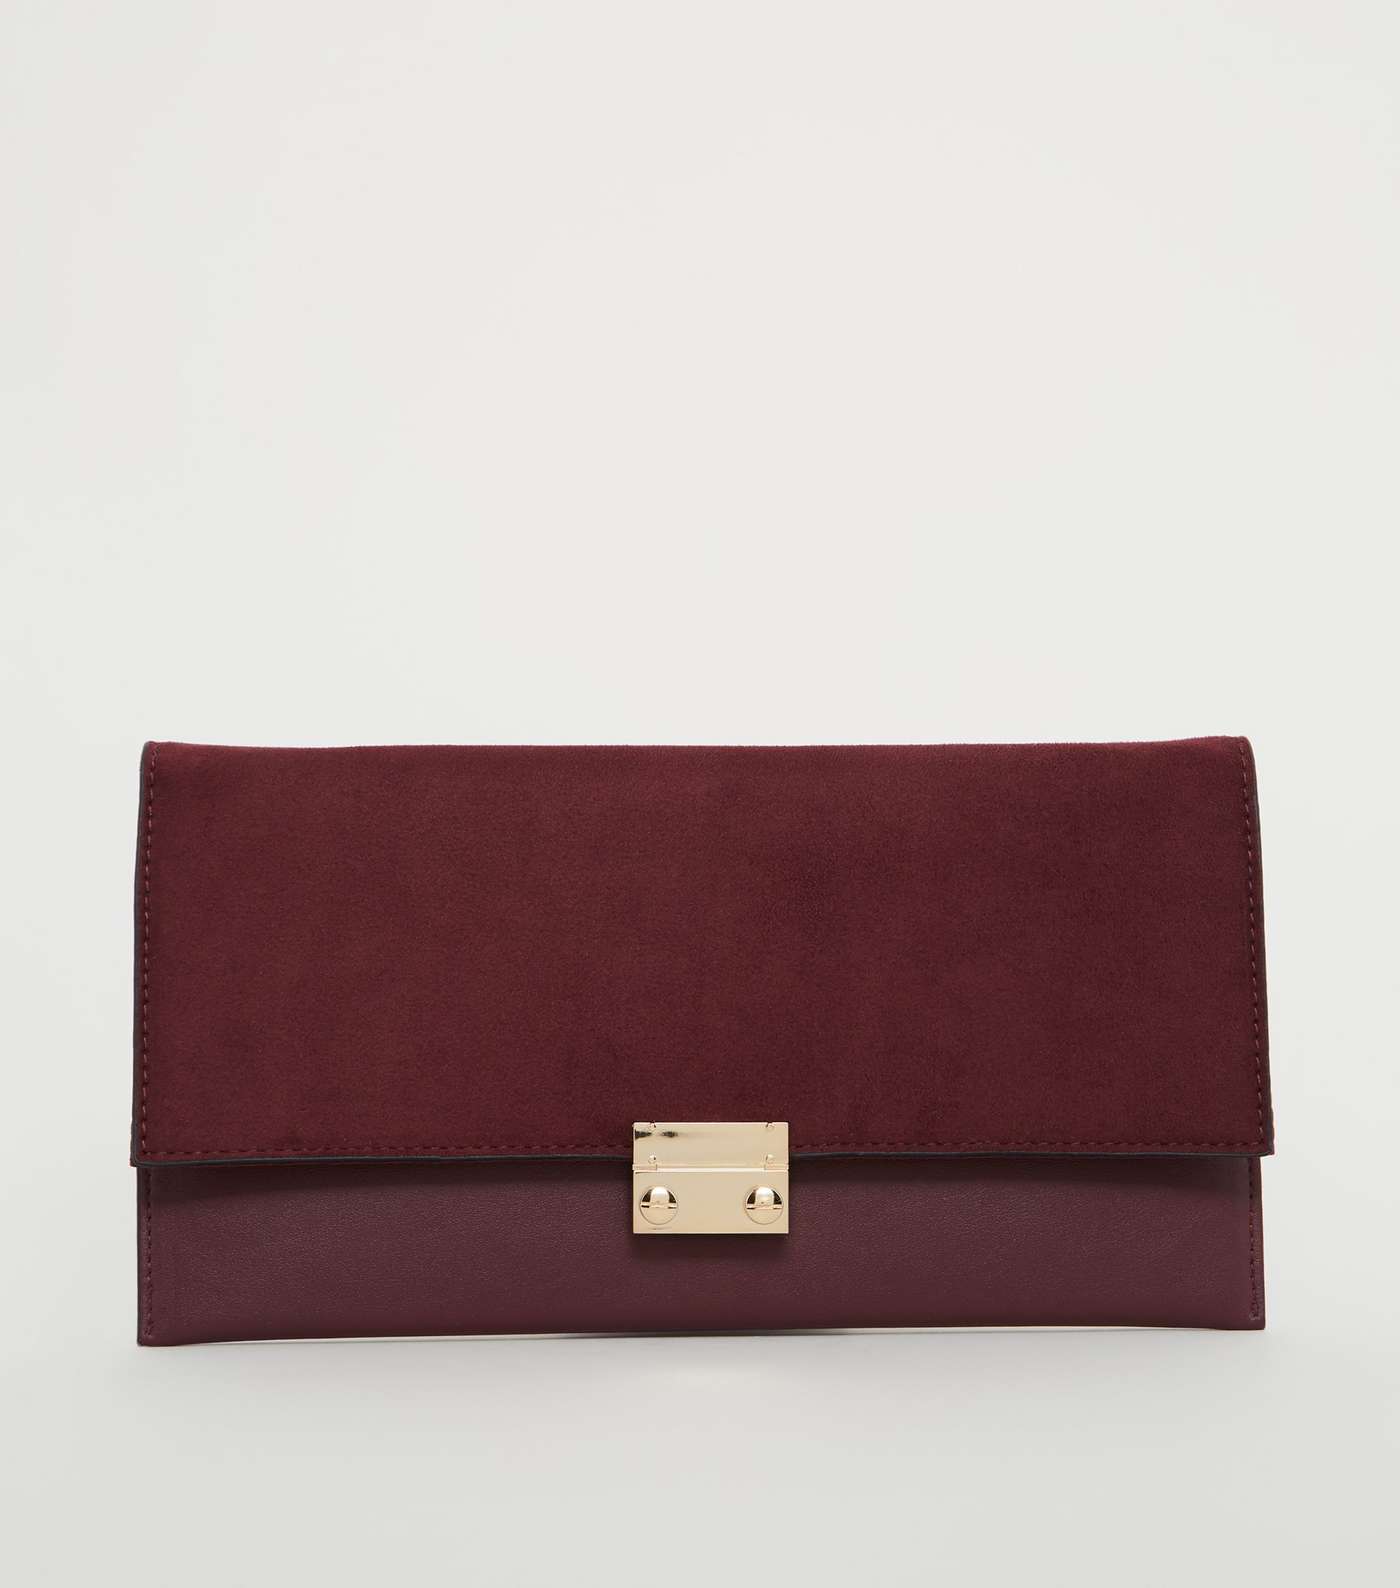 Burgundy Leather-Look Suedette Clutch Bag